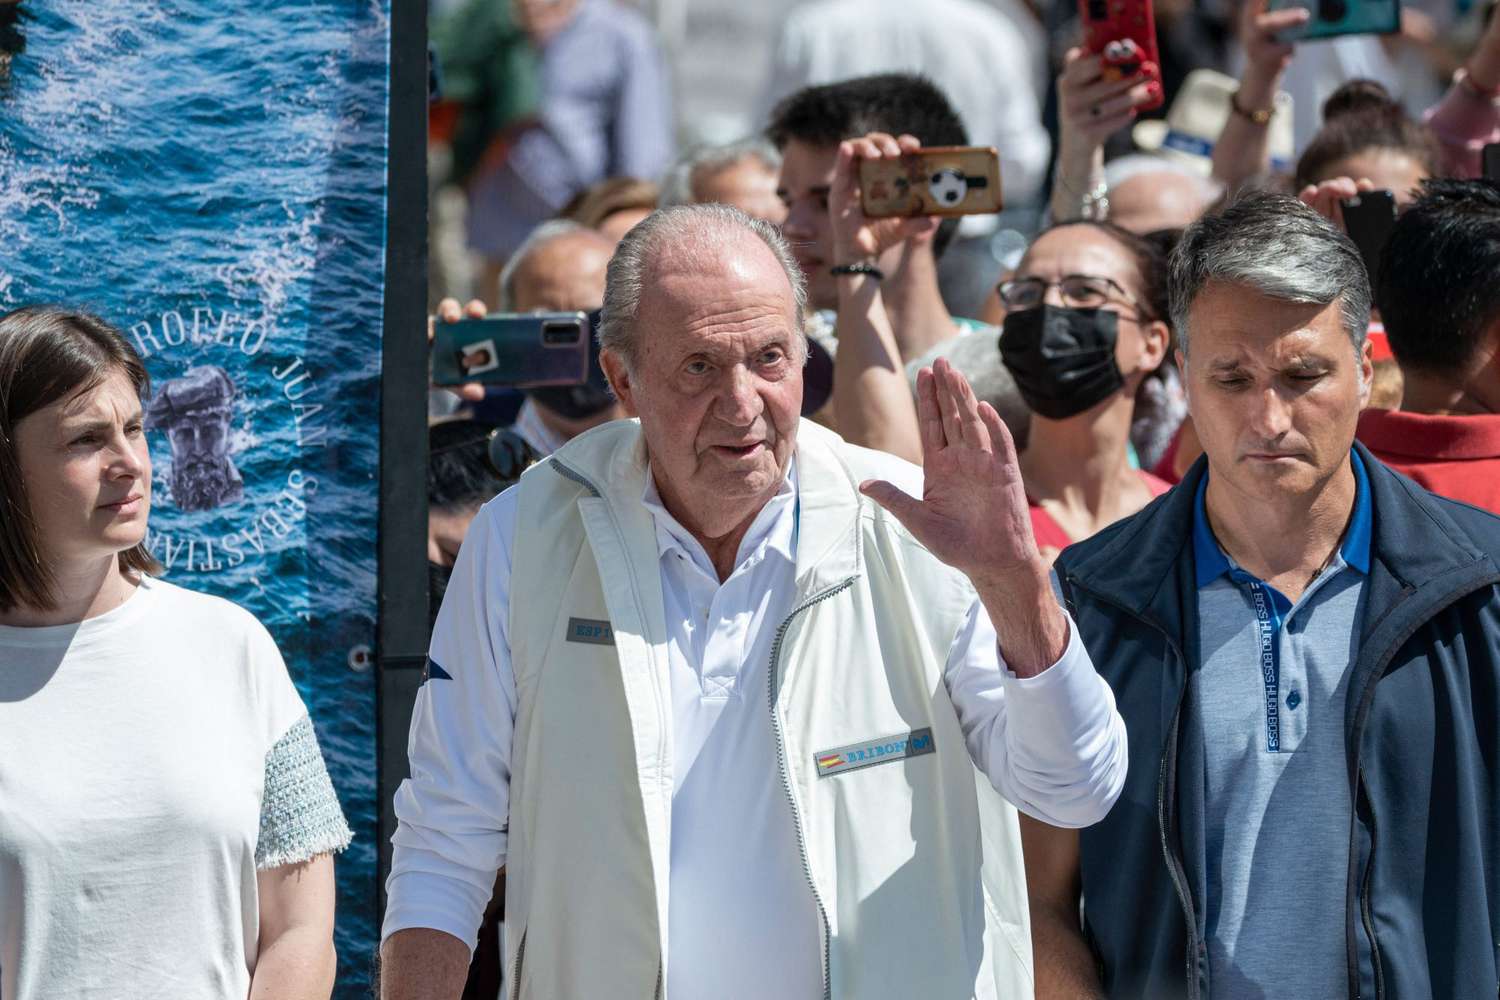 TOPSHOT - Spain's former King Juan Carlos I waves from his "Bribon" boat, as he attends the regatta of the InterRias trophy of 6M Spanish Cup, in the Galician town of Sanxenxo, northwestern Spain, on May 21, 2022. - Spain's former king returned to the country on May 19, 2022 for his first visit since he left nearly two years ago following a string of financial scandals. (Photo by Brais Lorenzo / AFP) (Photo by BRAIS LORENZO/AFP via Getty Images)